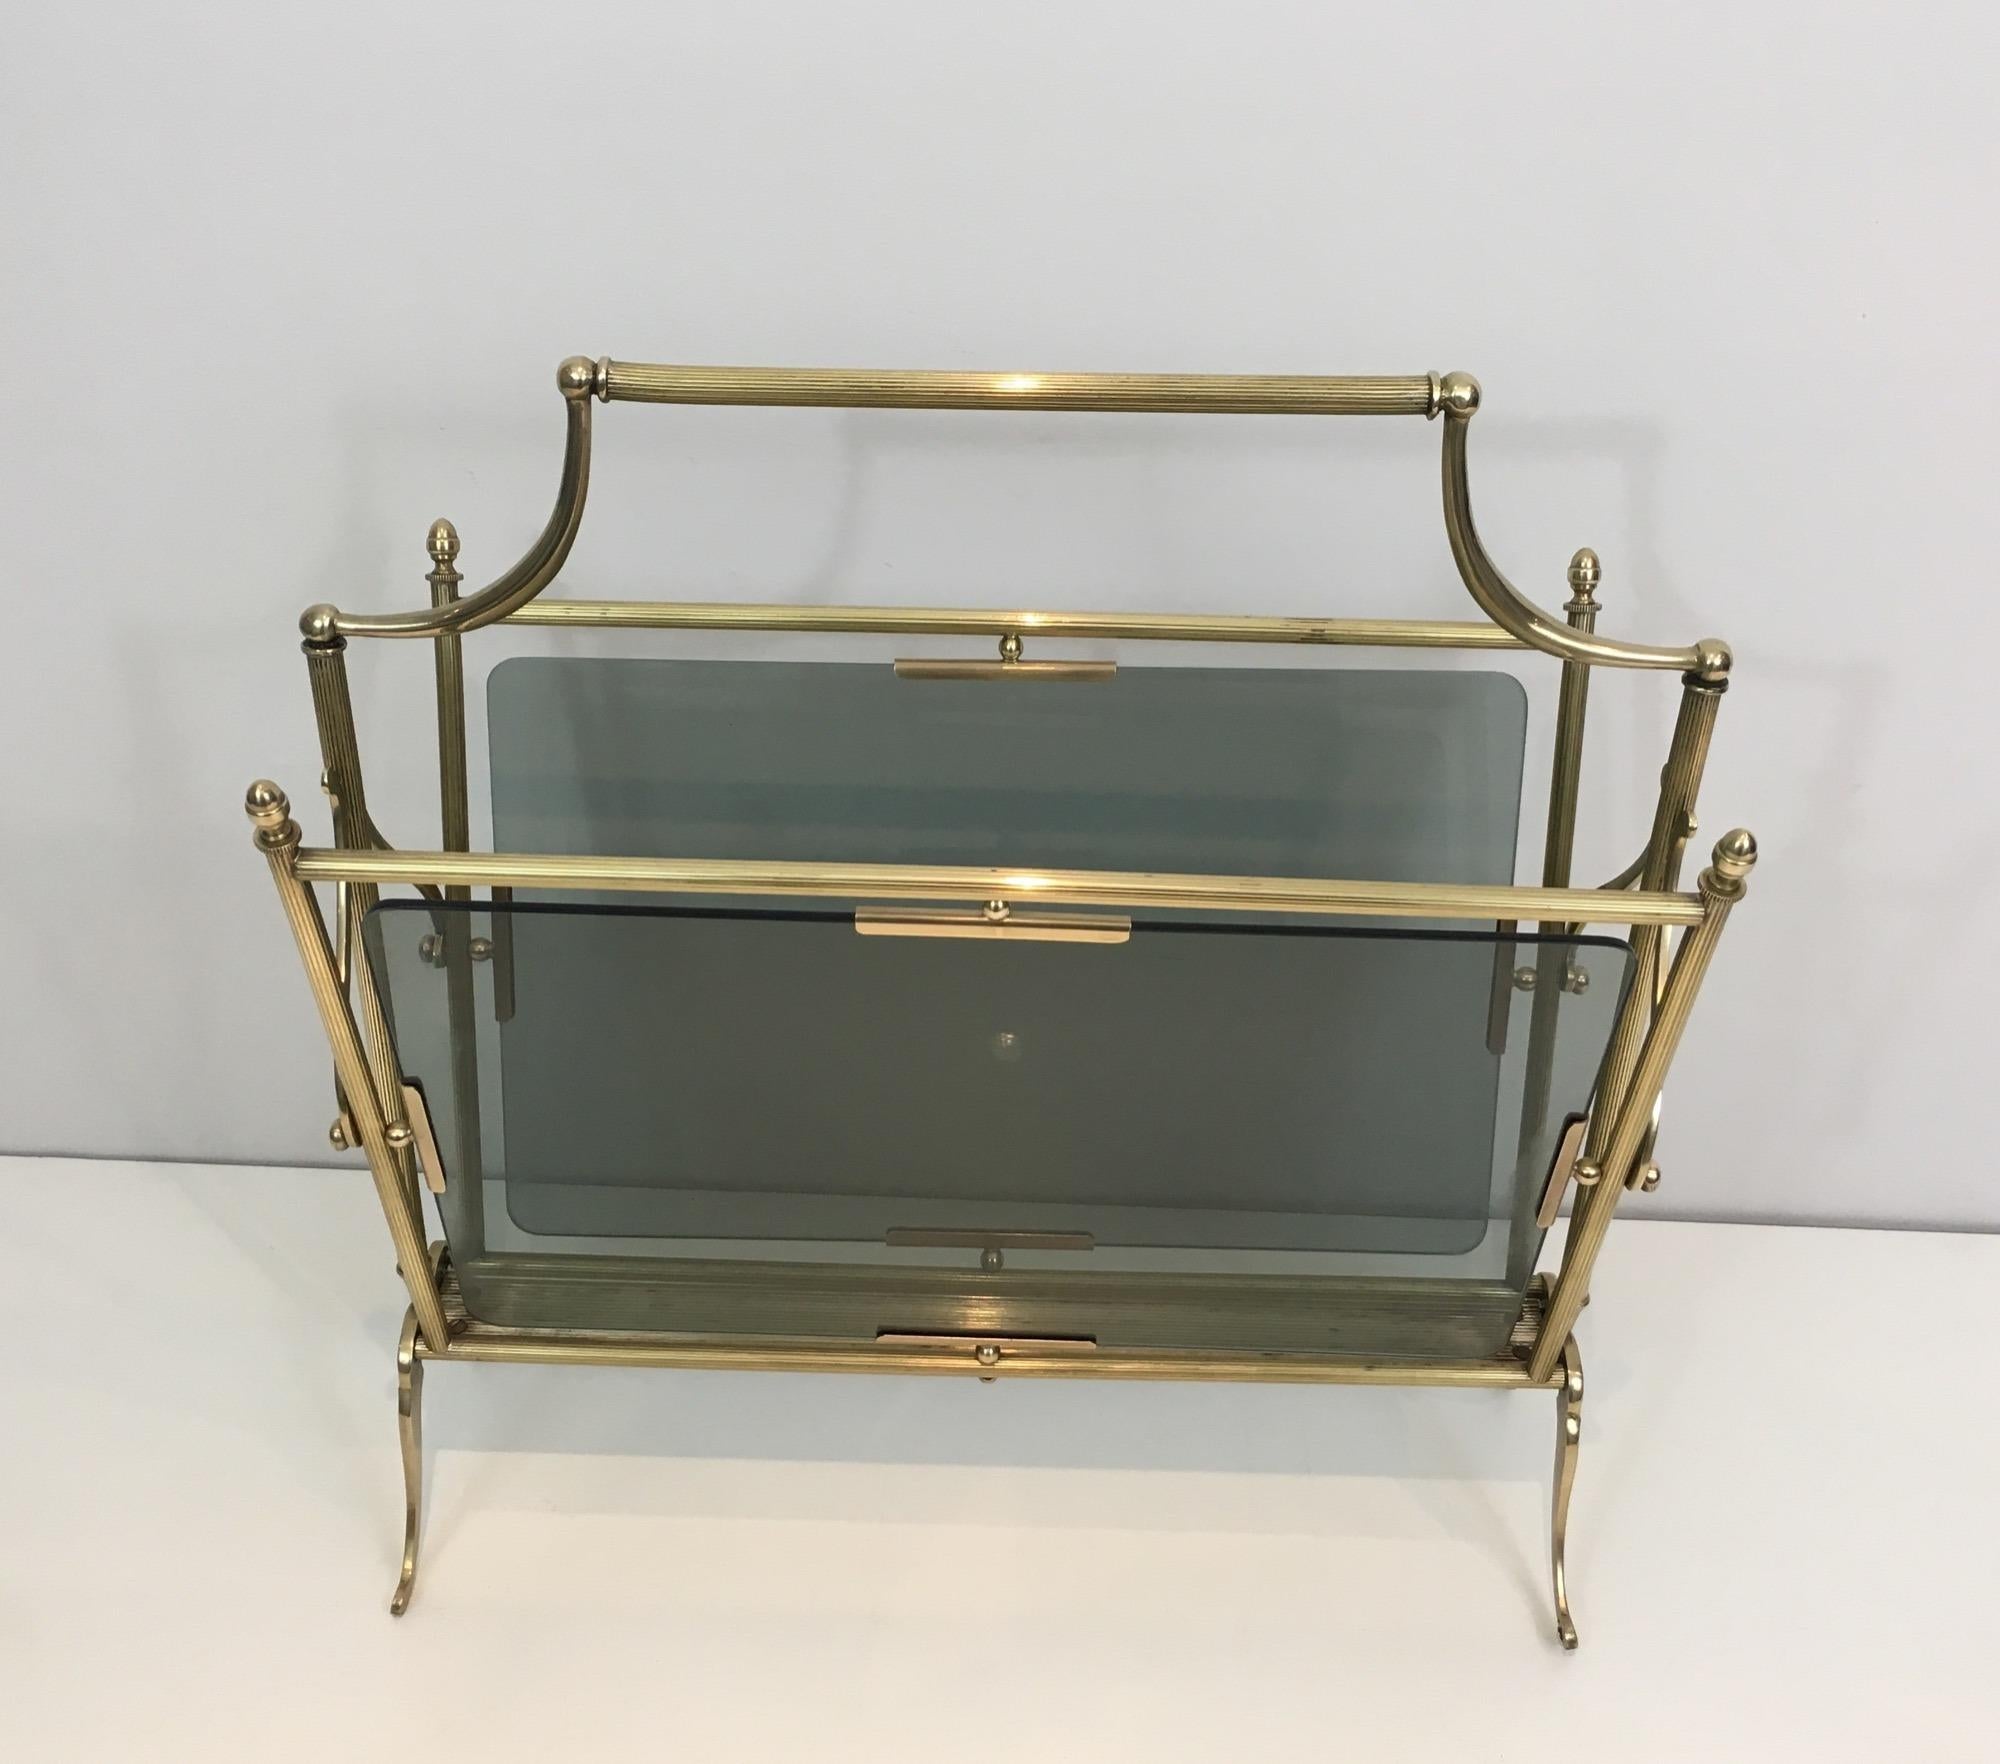 This neoclassical style magazine rack is made of brass with blueish glass . This is a French work by Maison Jansen. Circa 1940. A pair is available